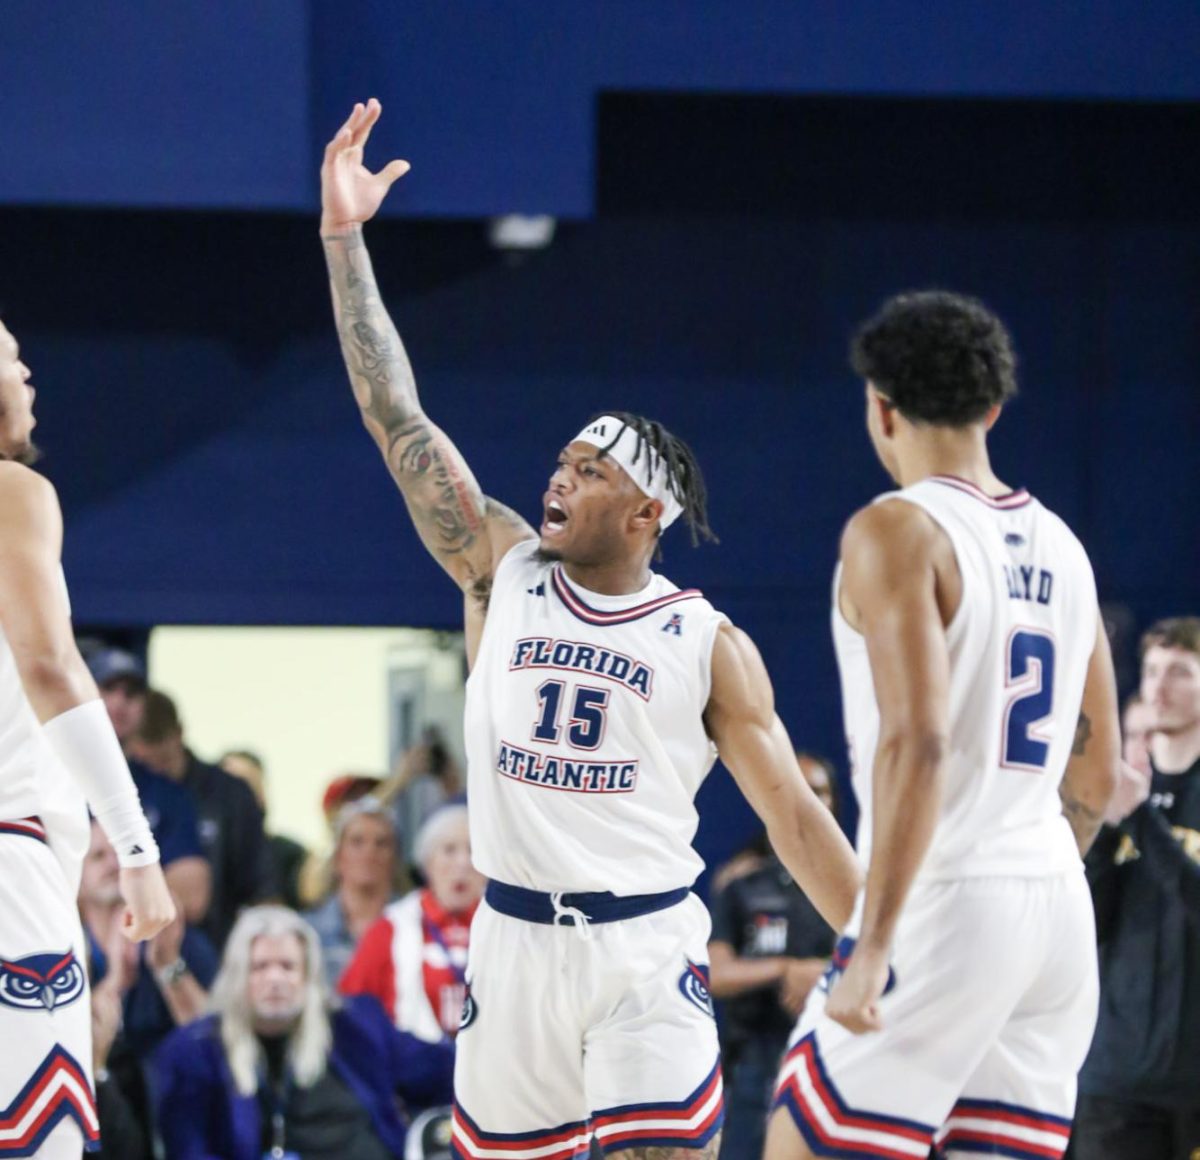 Alijah+Martin+hyping+up+the+FAU+Student+Section+during+the+teams+86-77+comeback+win+against+Wichita+St.+